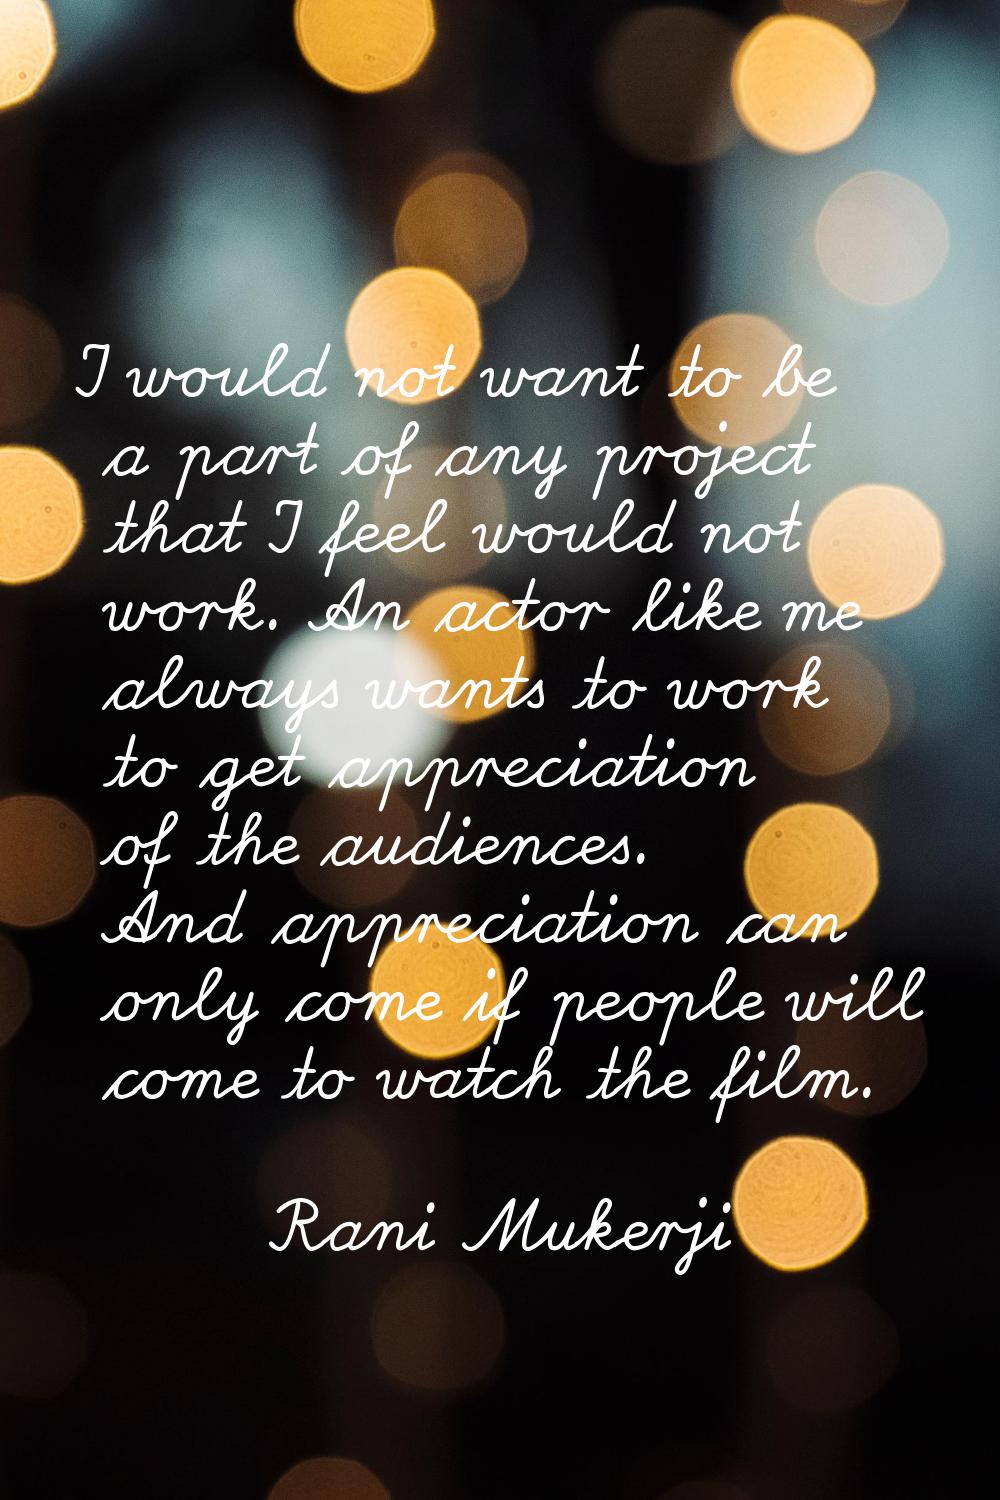 I would not want to be a part of any project that I feel would not work. An actor like me always wa